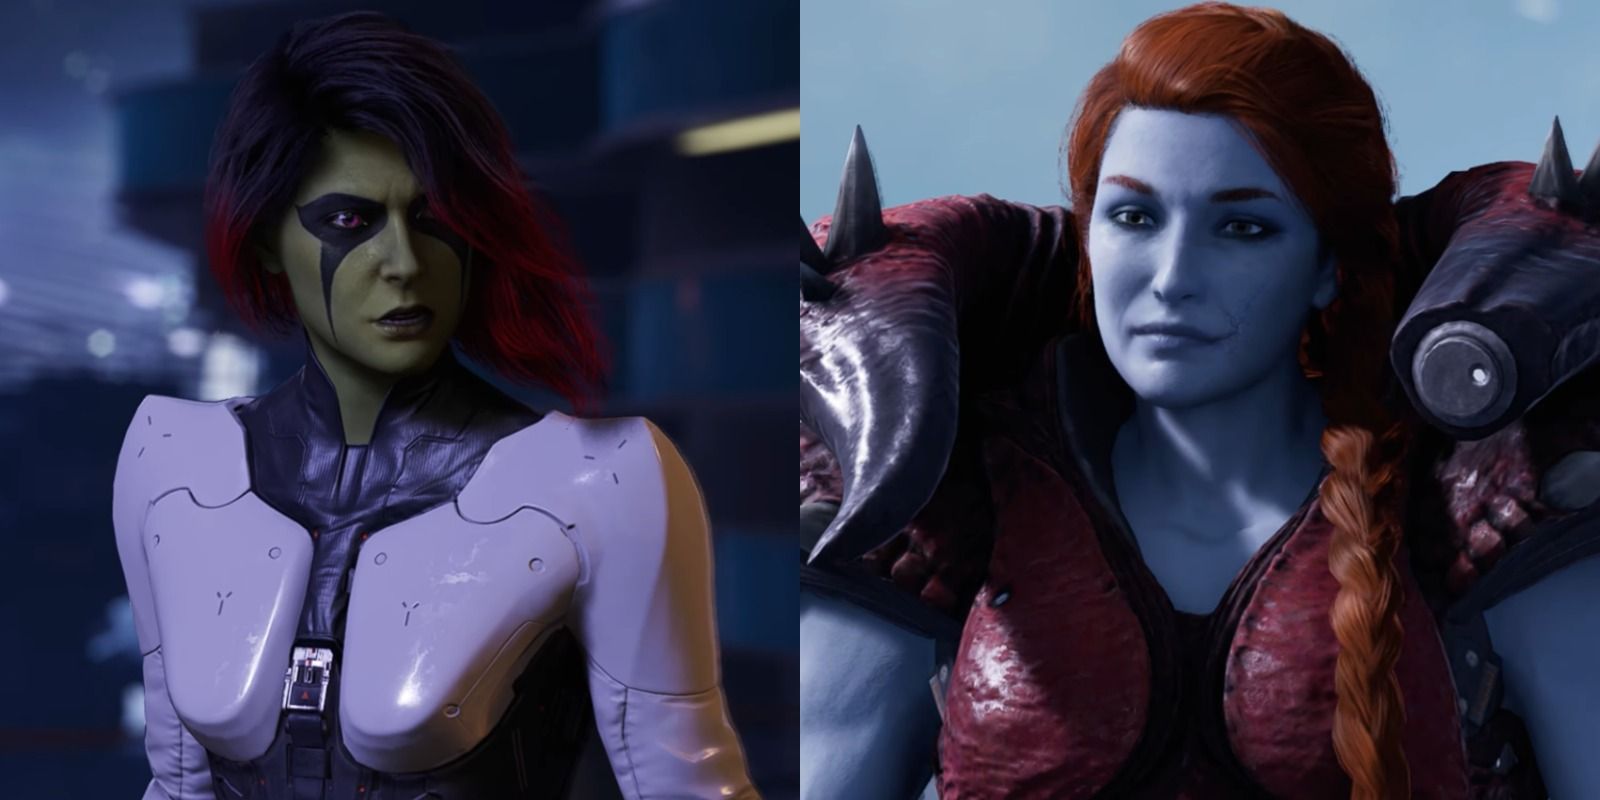 The 10 Most Powerful Characters In Marvel’s Guardians Of The Galaxy Game